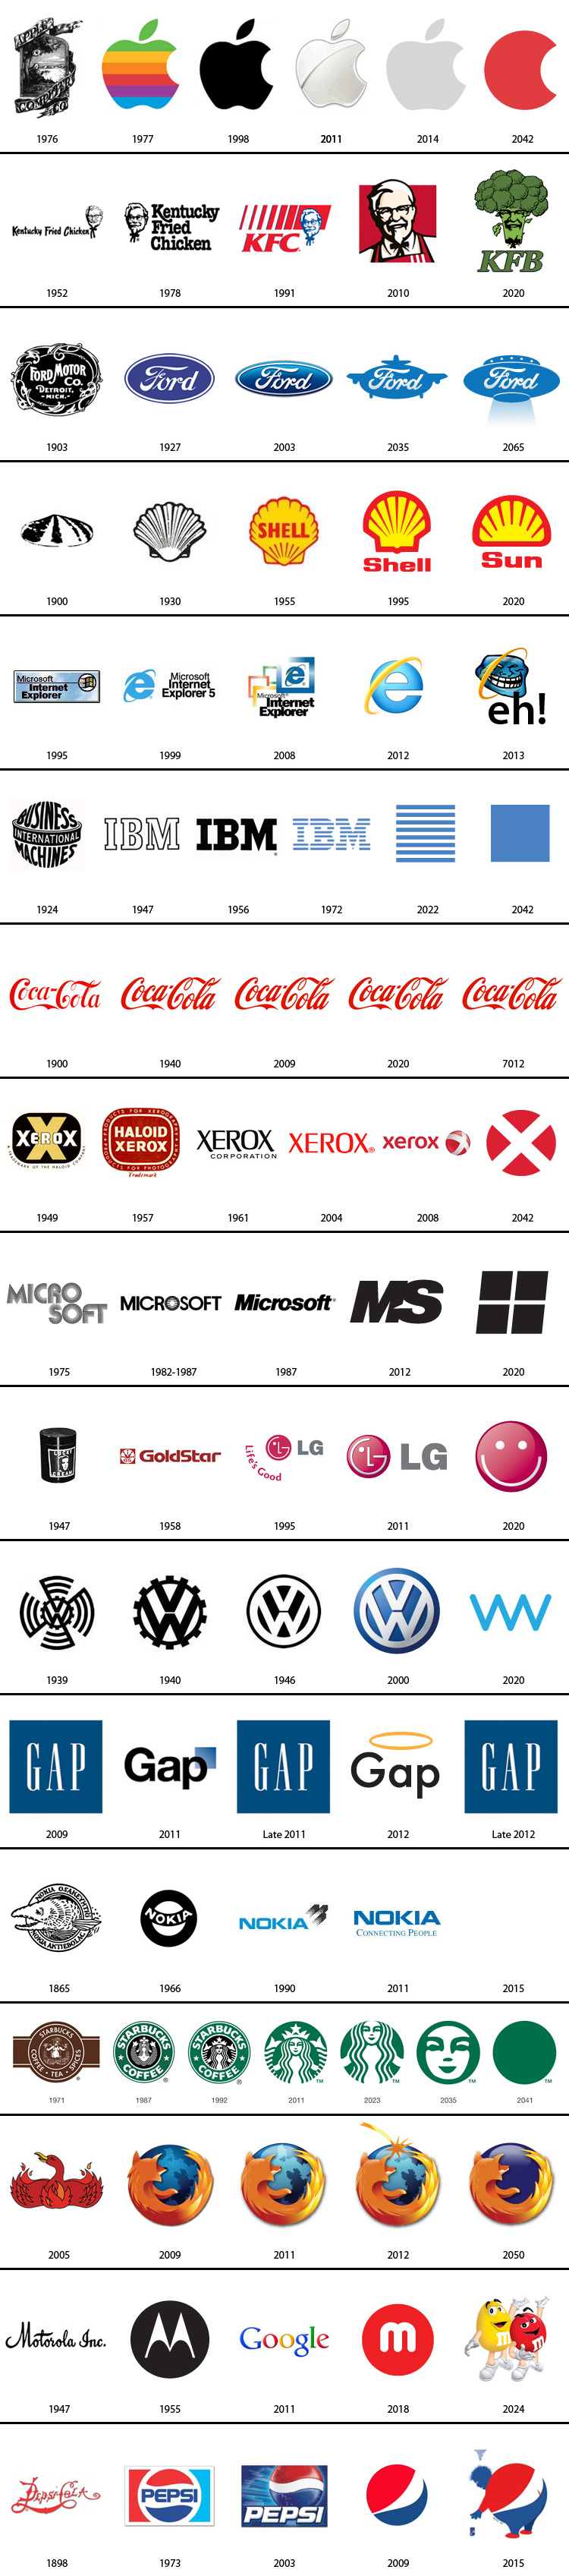 once and future logos